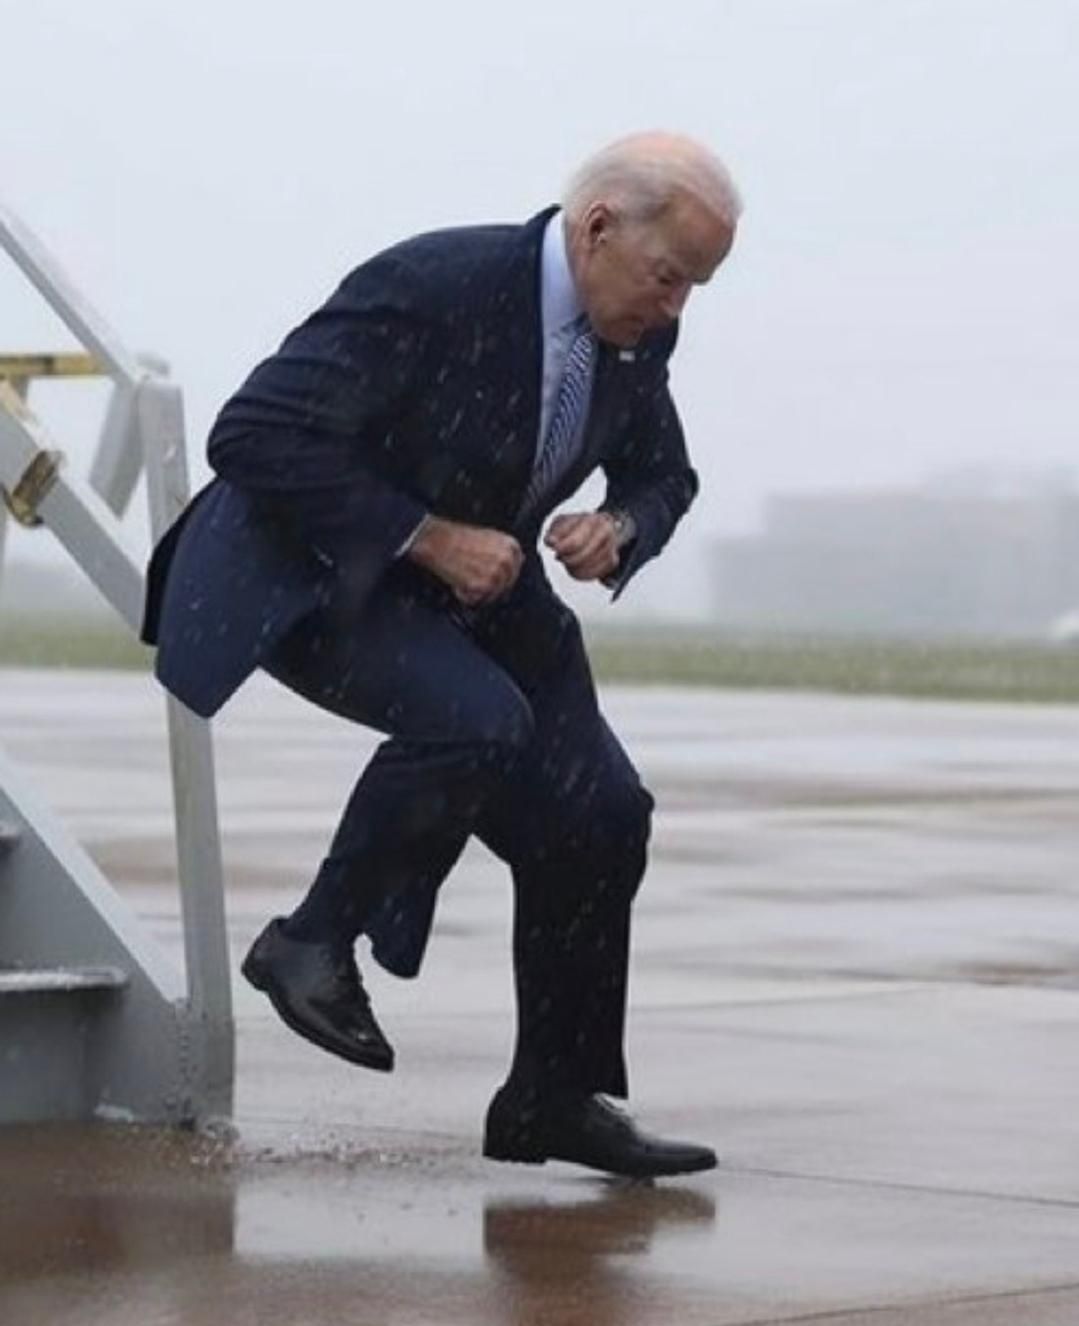 Joe Biden break dancing on the tarmac after receiving his first "10% for the big guy" payment in 2017.